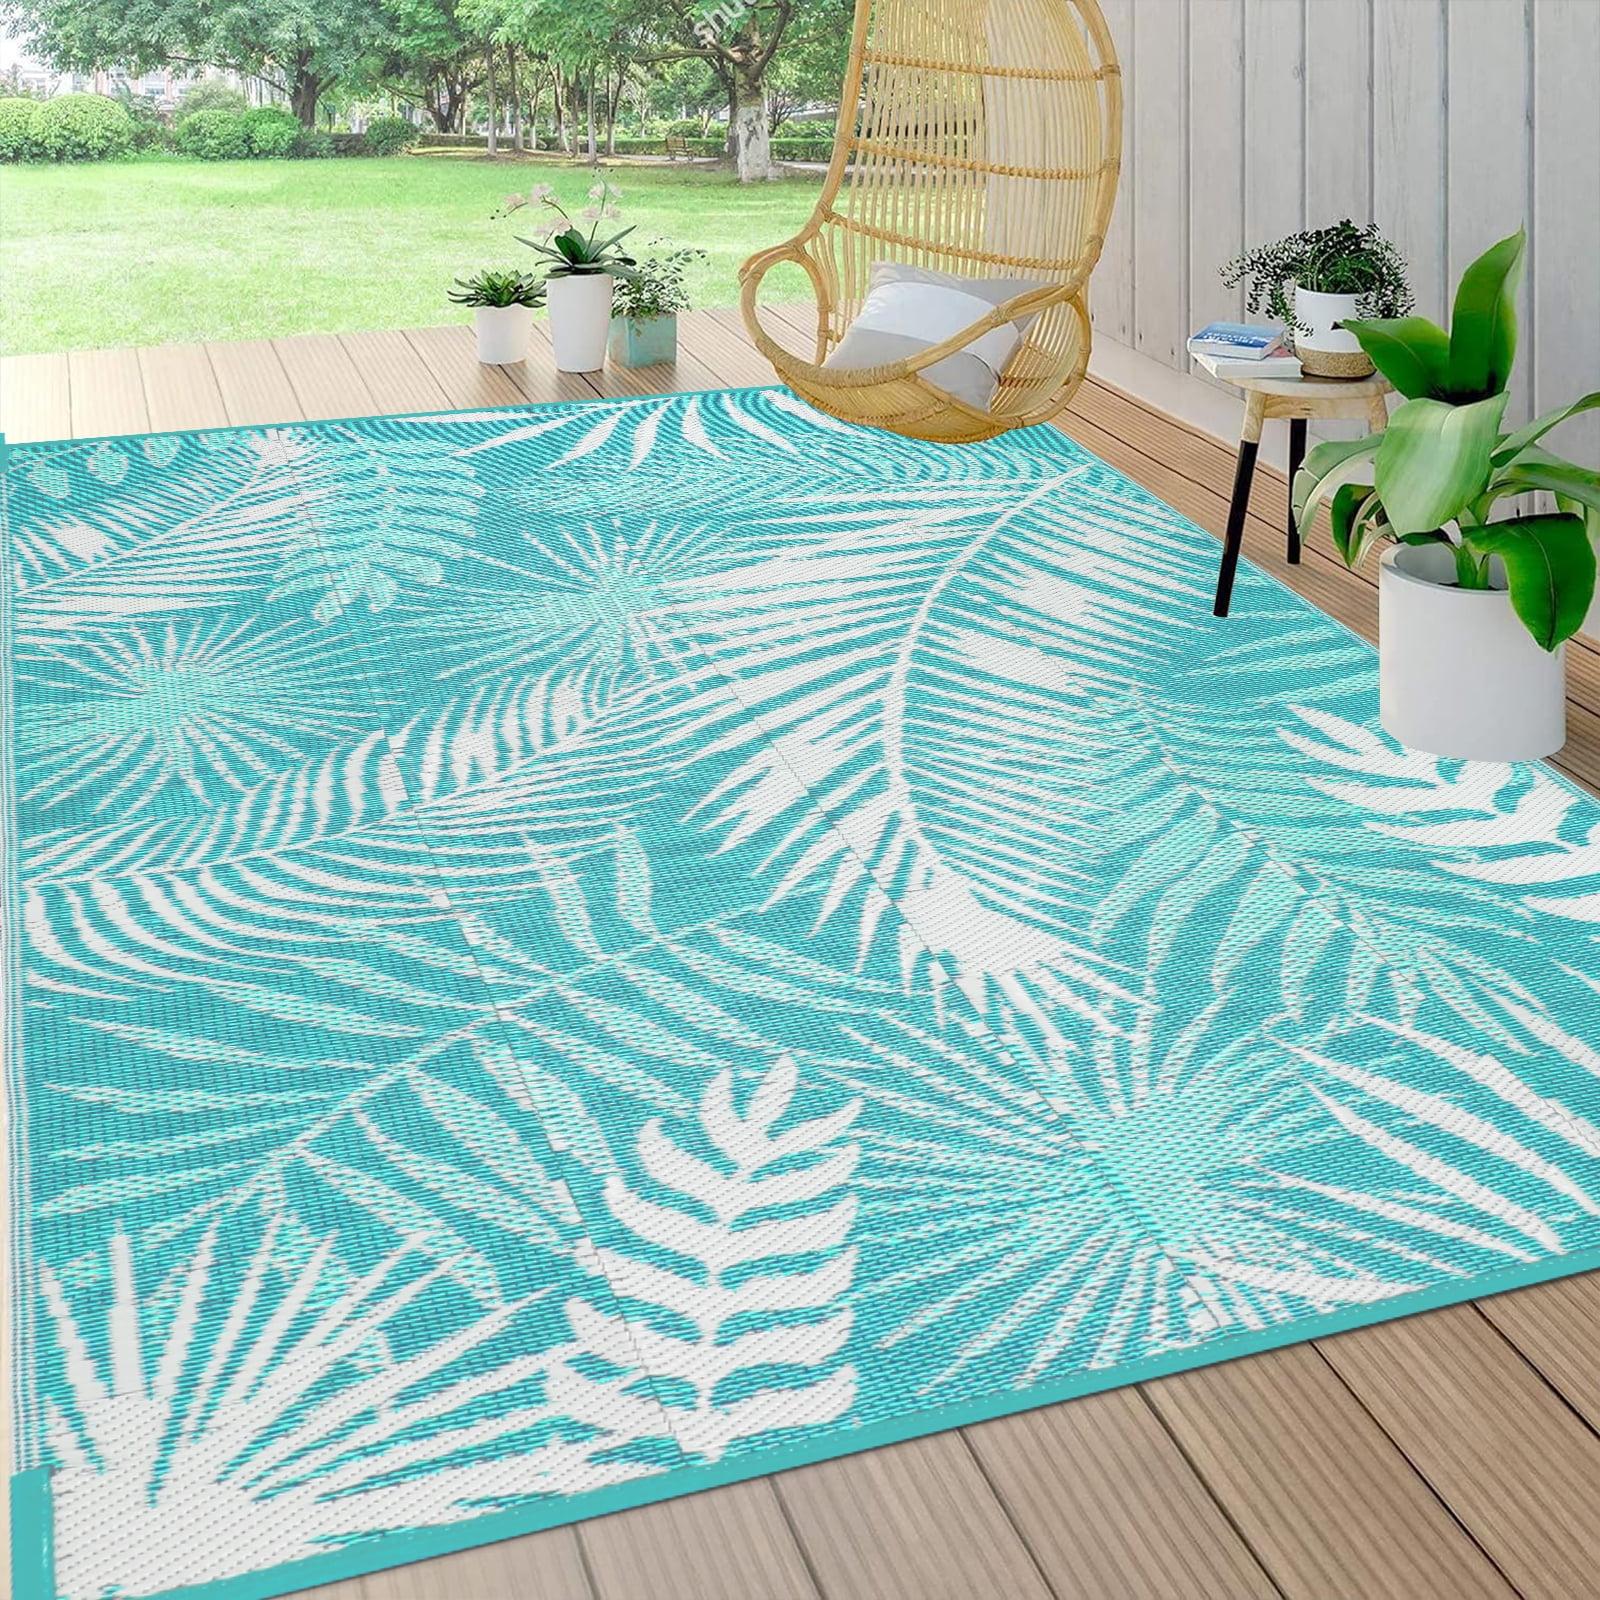 wikiwiki Outdoor Rug, 5x8ft Waterproof Reversible Mat Indoor Outdoor Rugs  Carpet, Small Area Rug Plastic Straw Rug for Patio Deck Balcony Pool RV